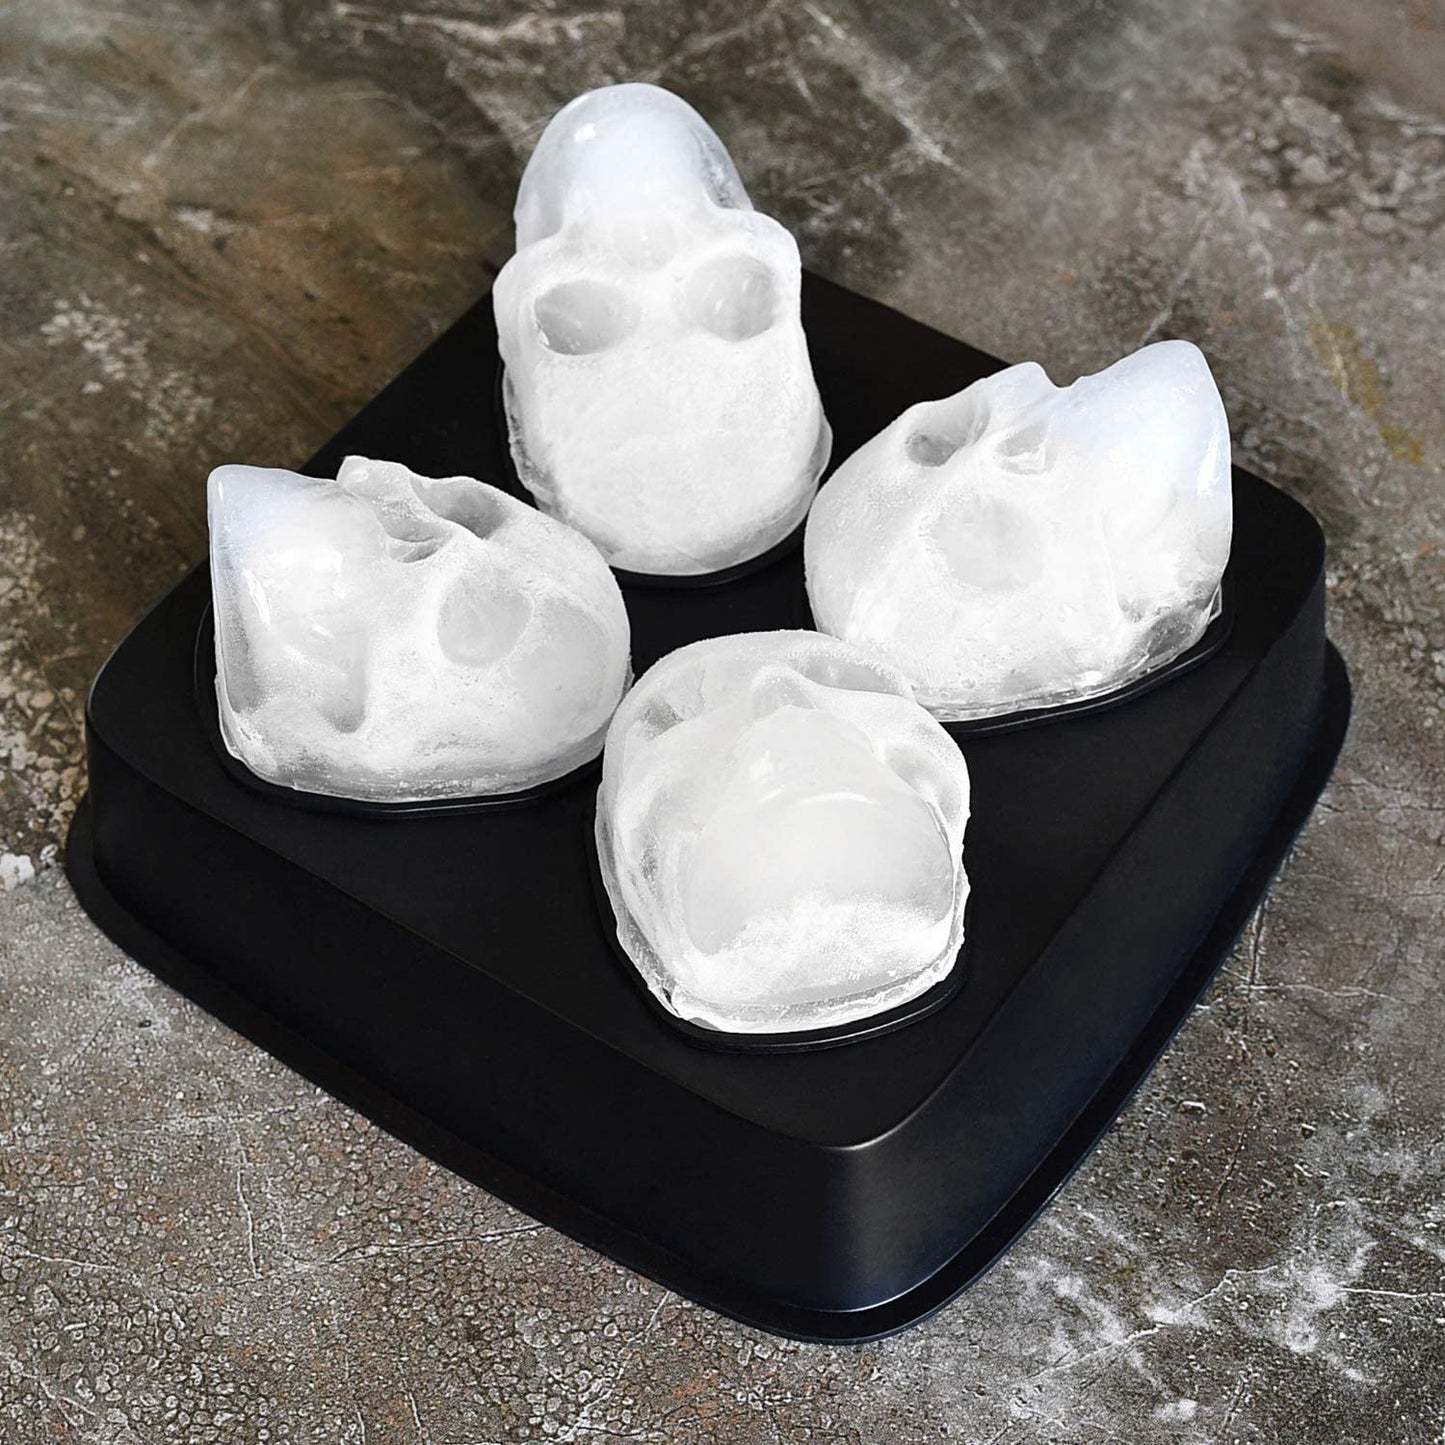 Make Any Drink More Curious With Skull-Shaped Ice - Gastro Obscura